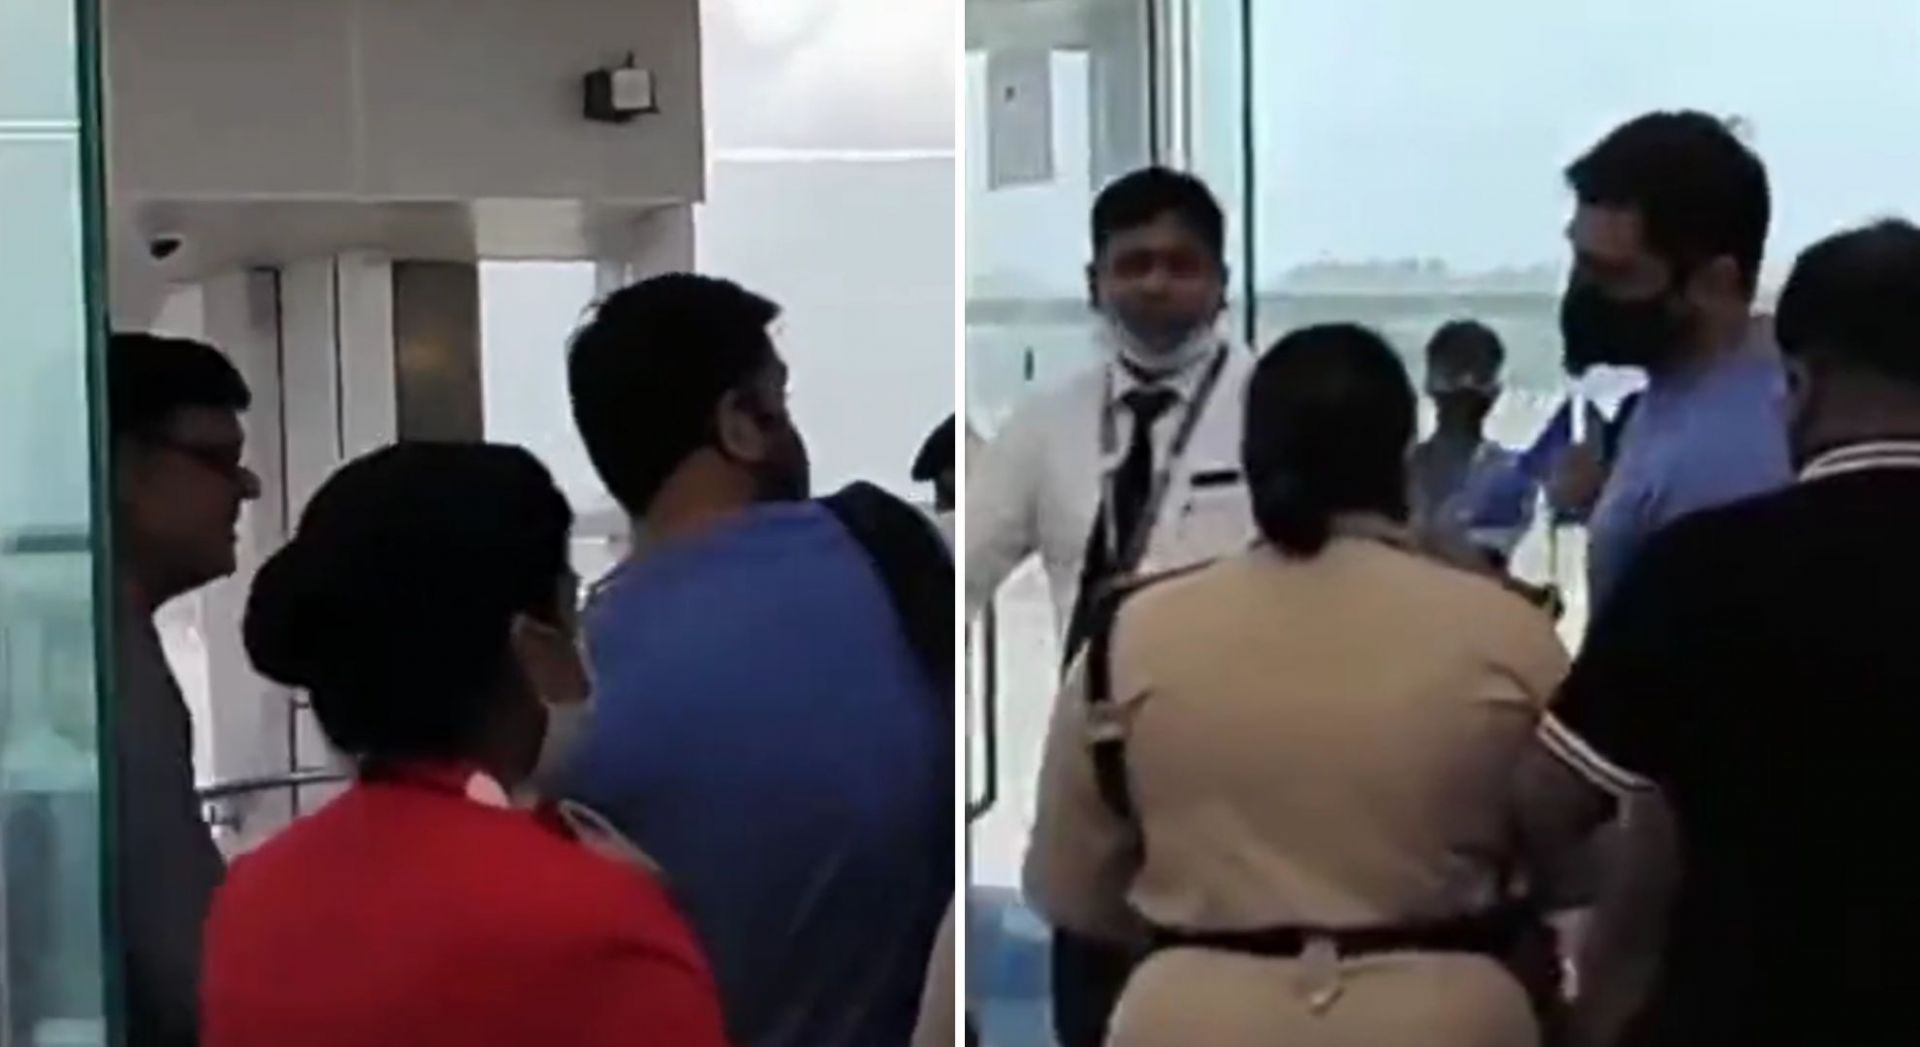 MS Dhoni checking in at the airport.